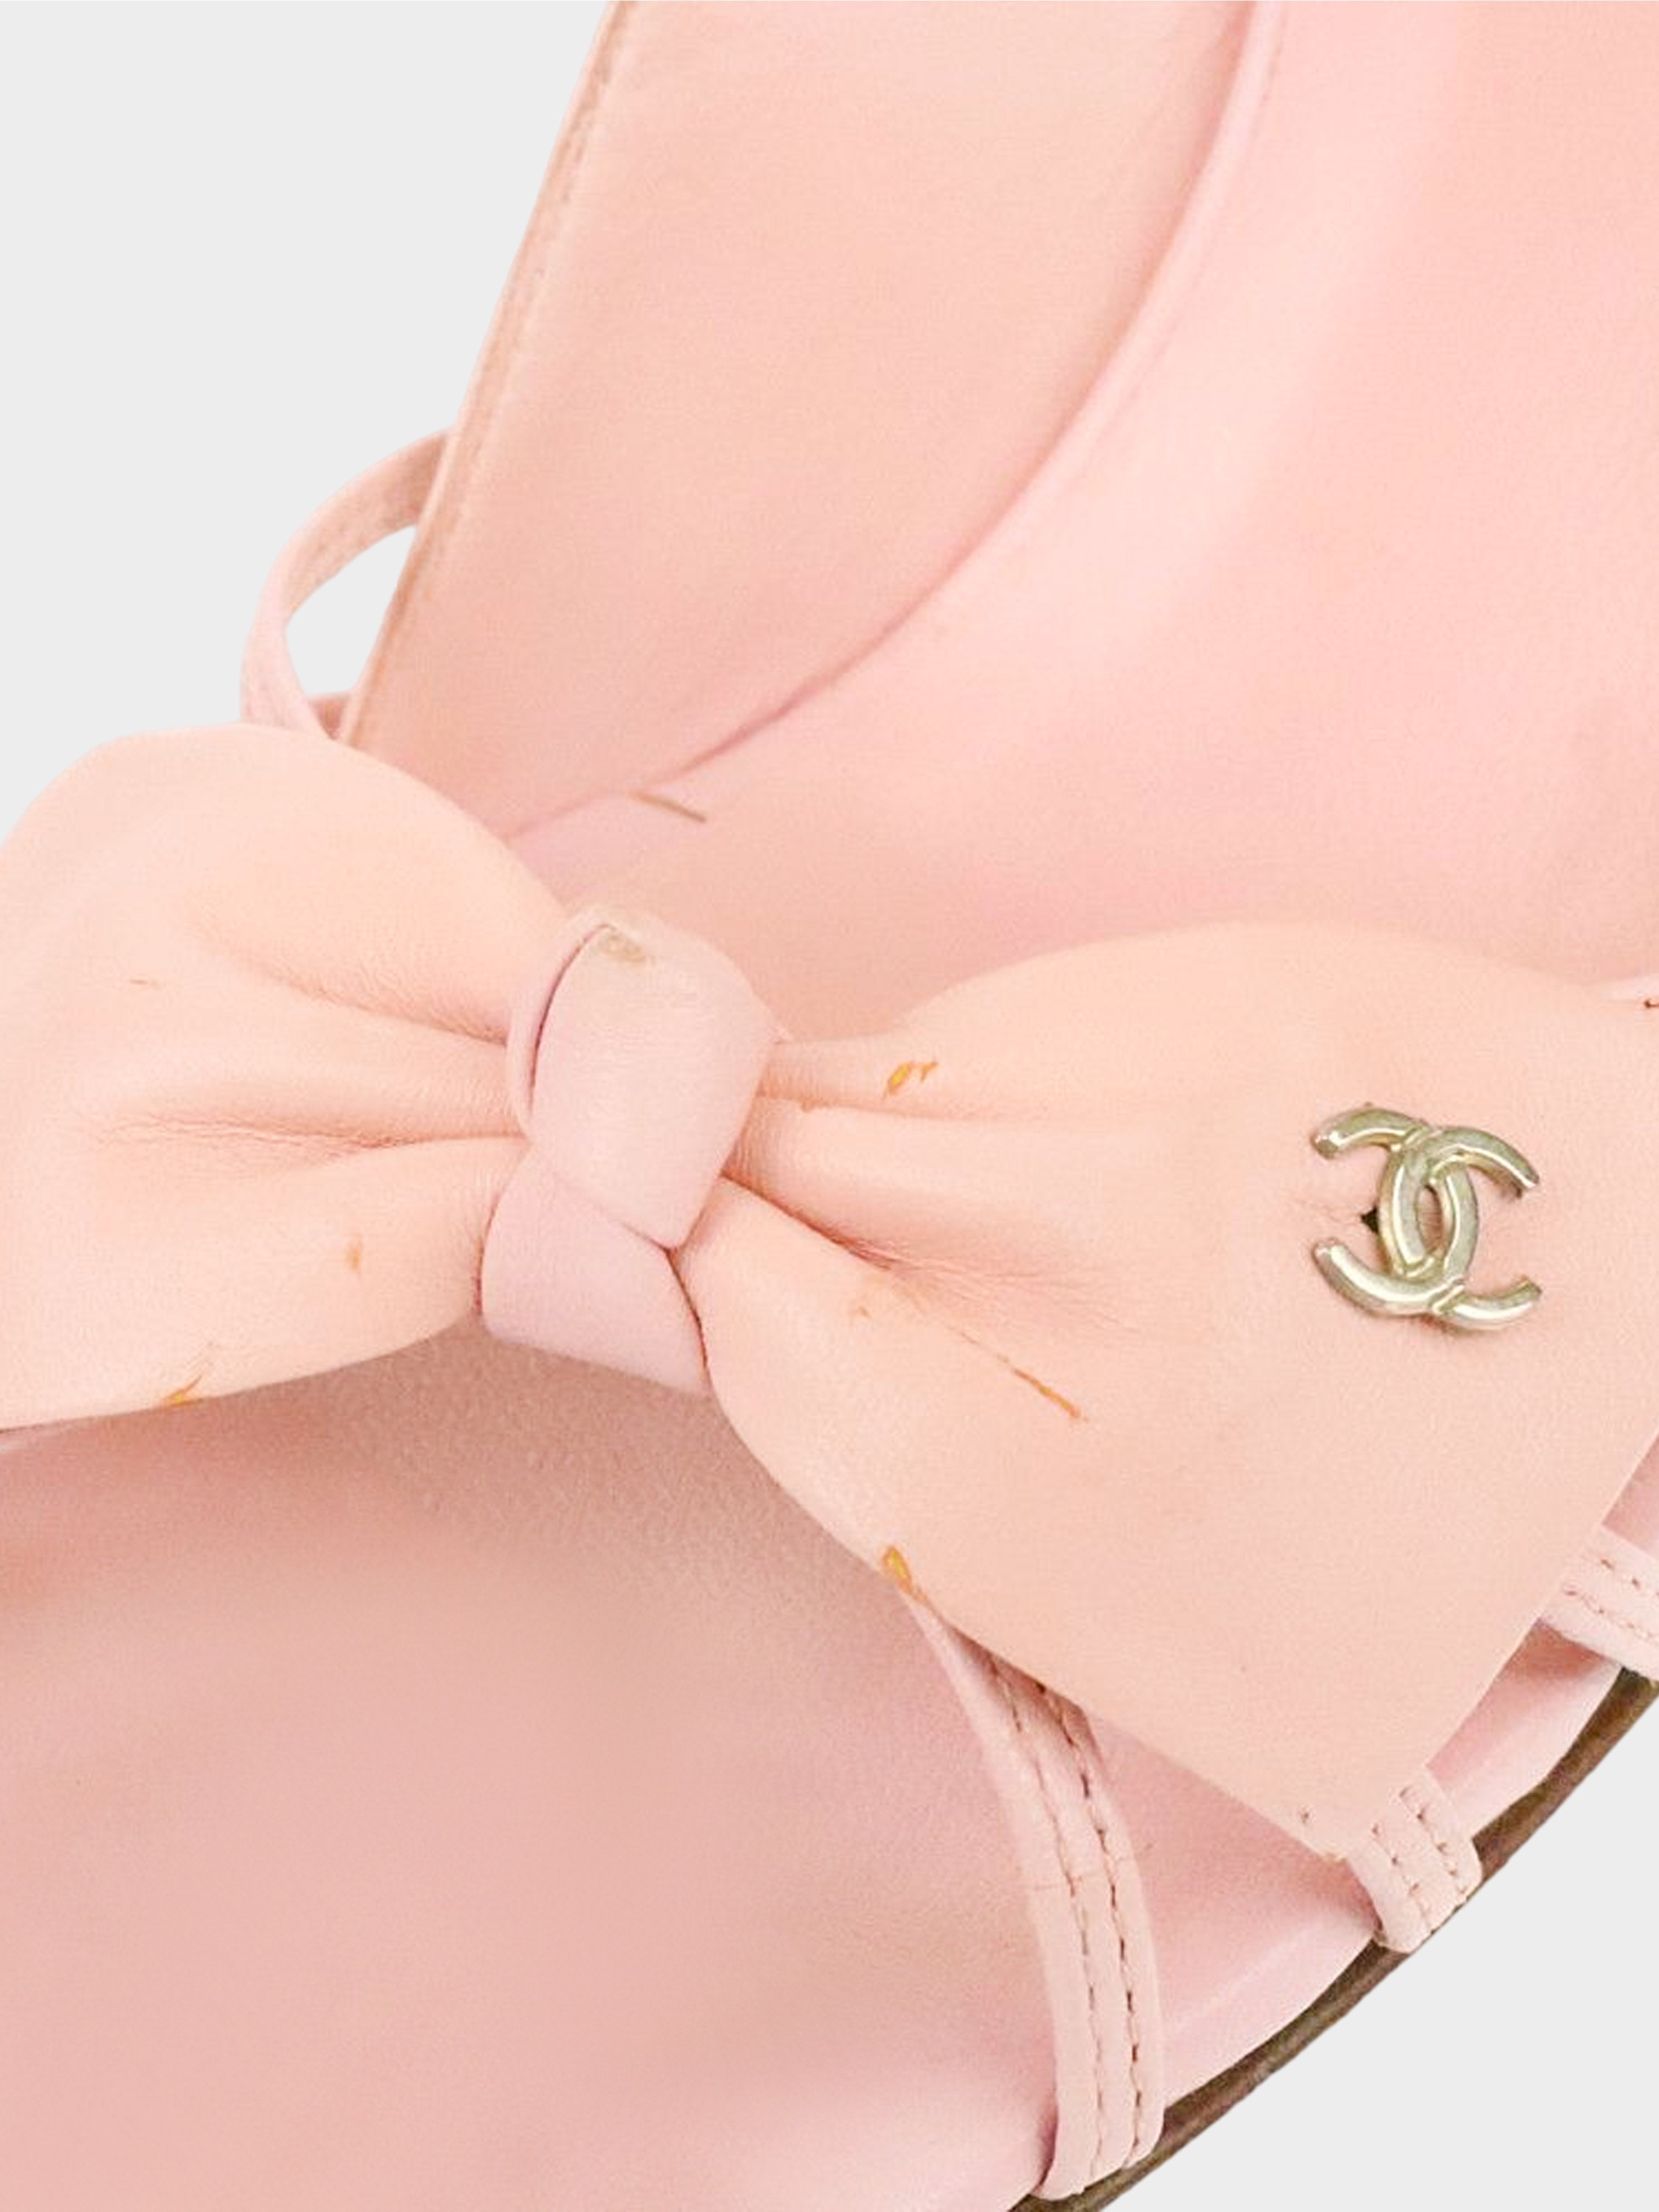 Chanel 2000s Pink CC Dainty Leather Bow Pumps